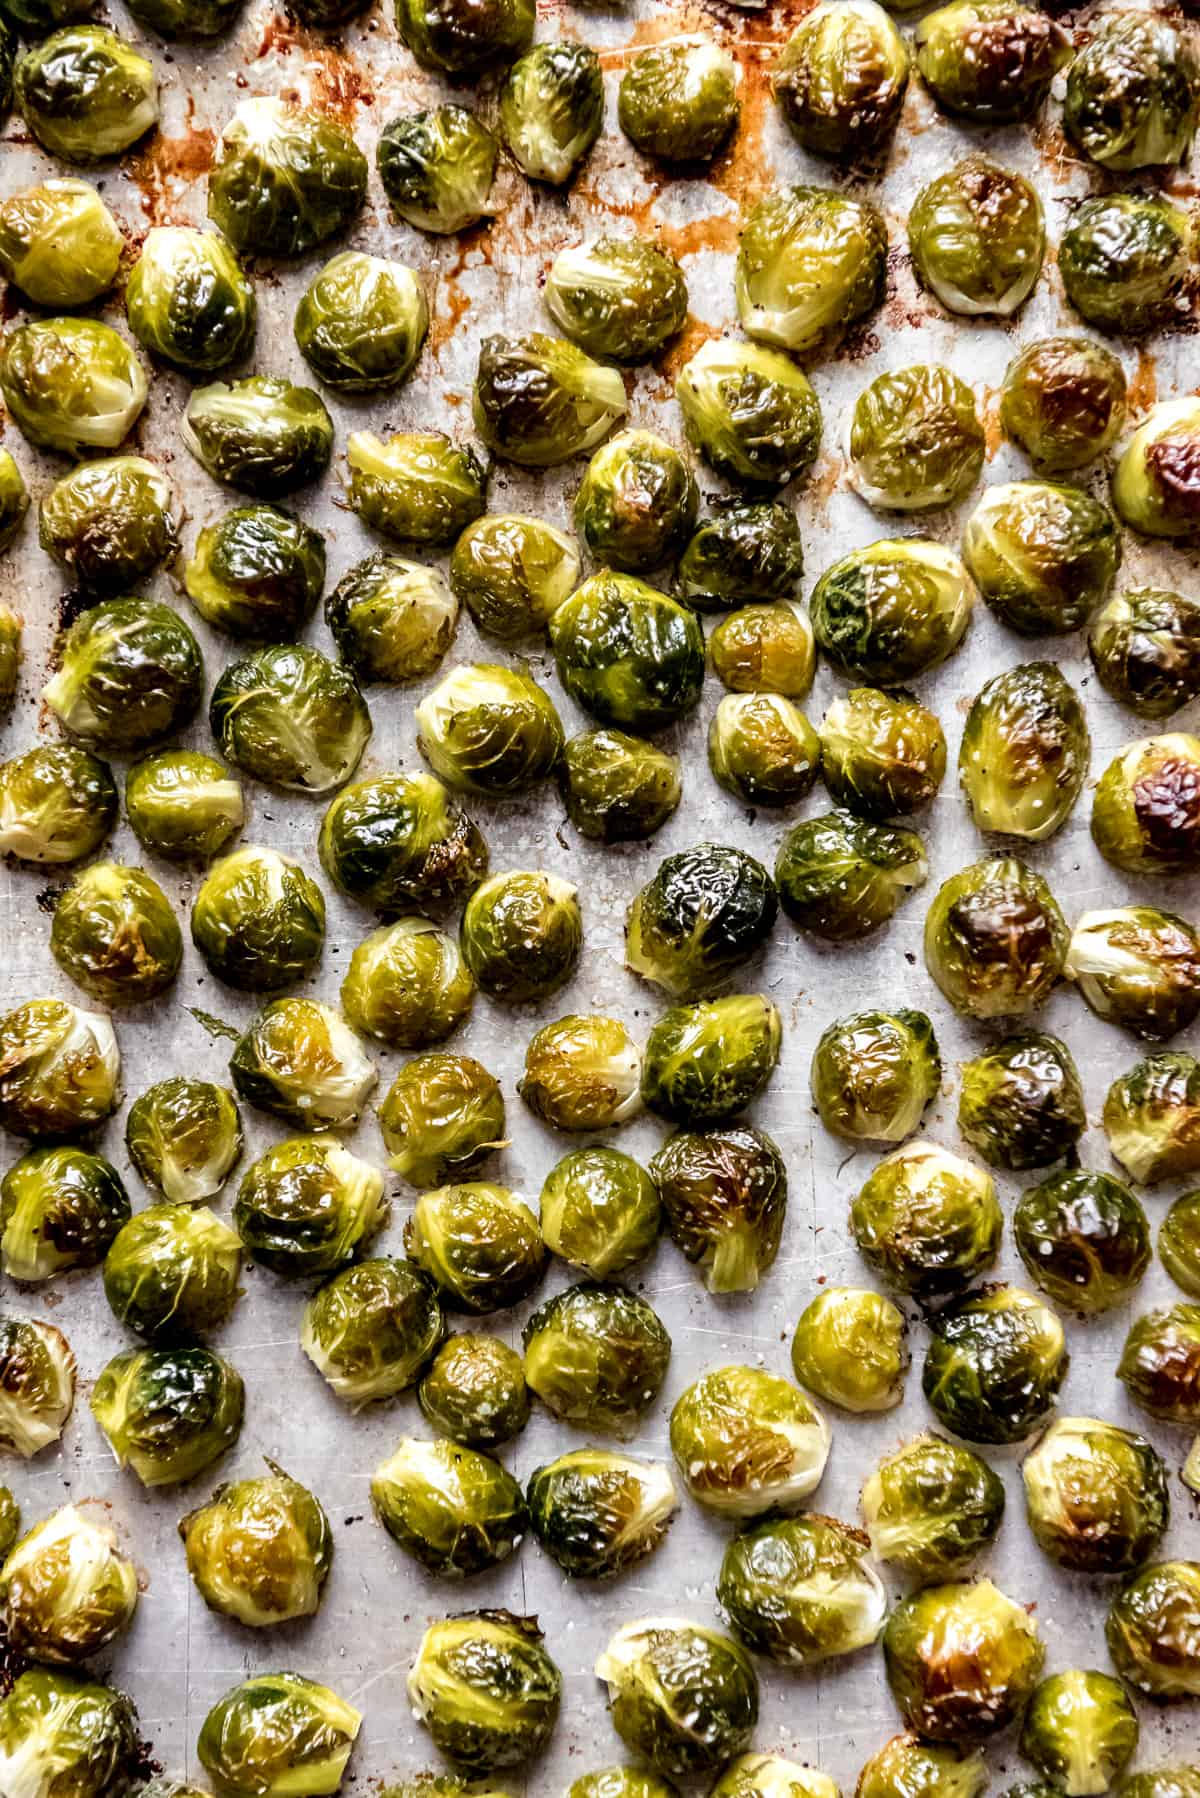 Roasted brussels sprouts on a baking sheet lined with parchment paper.